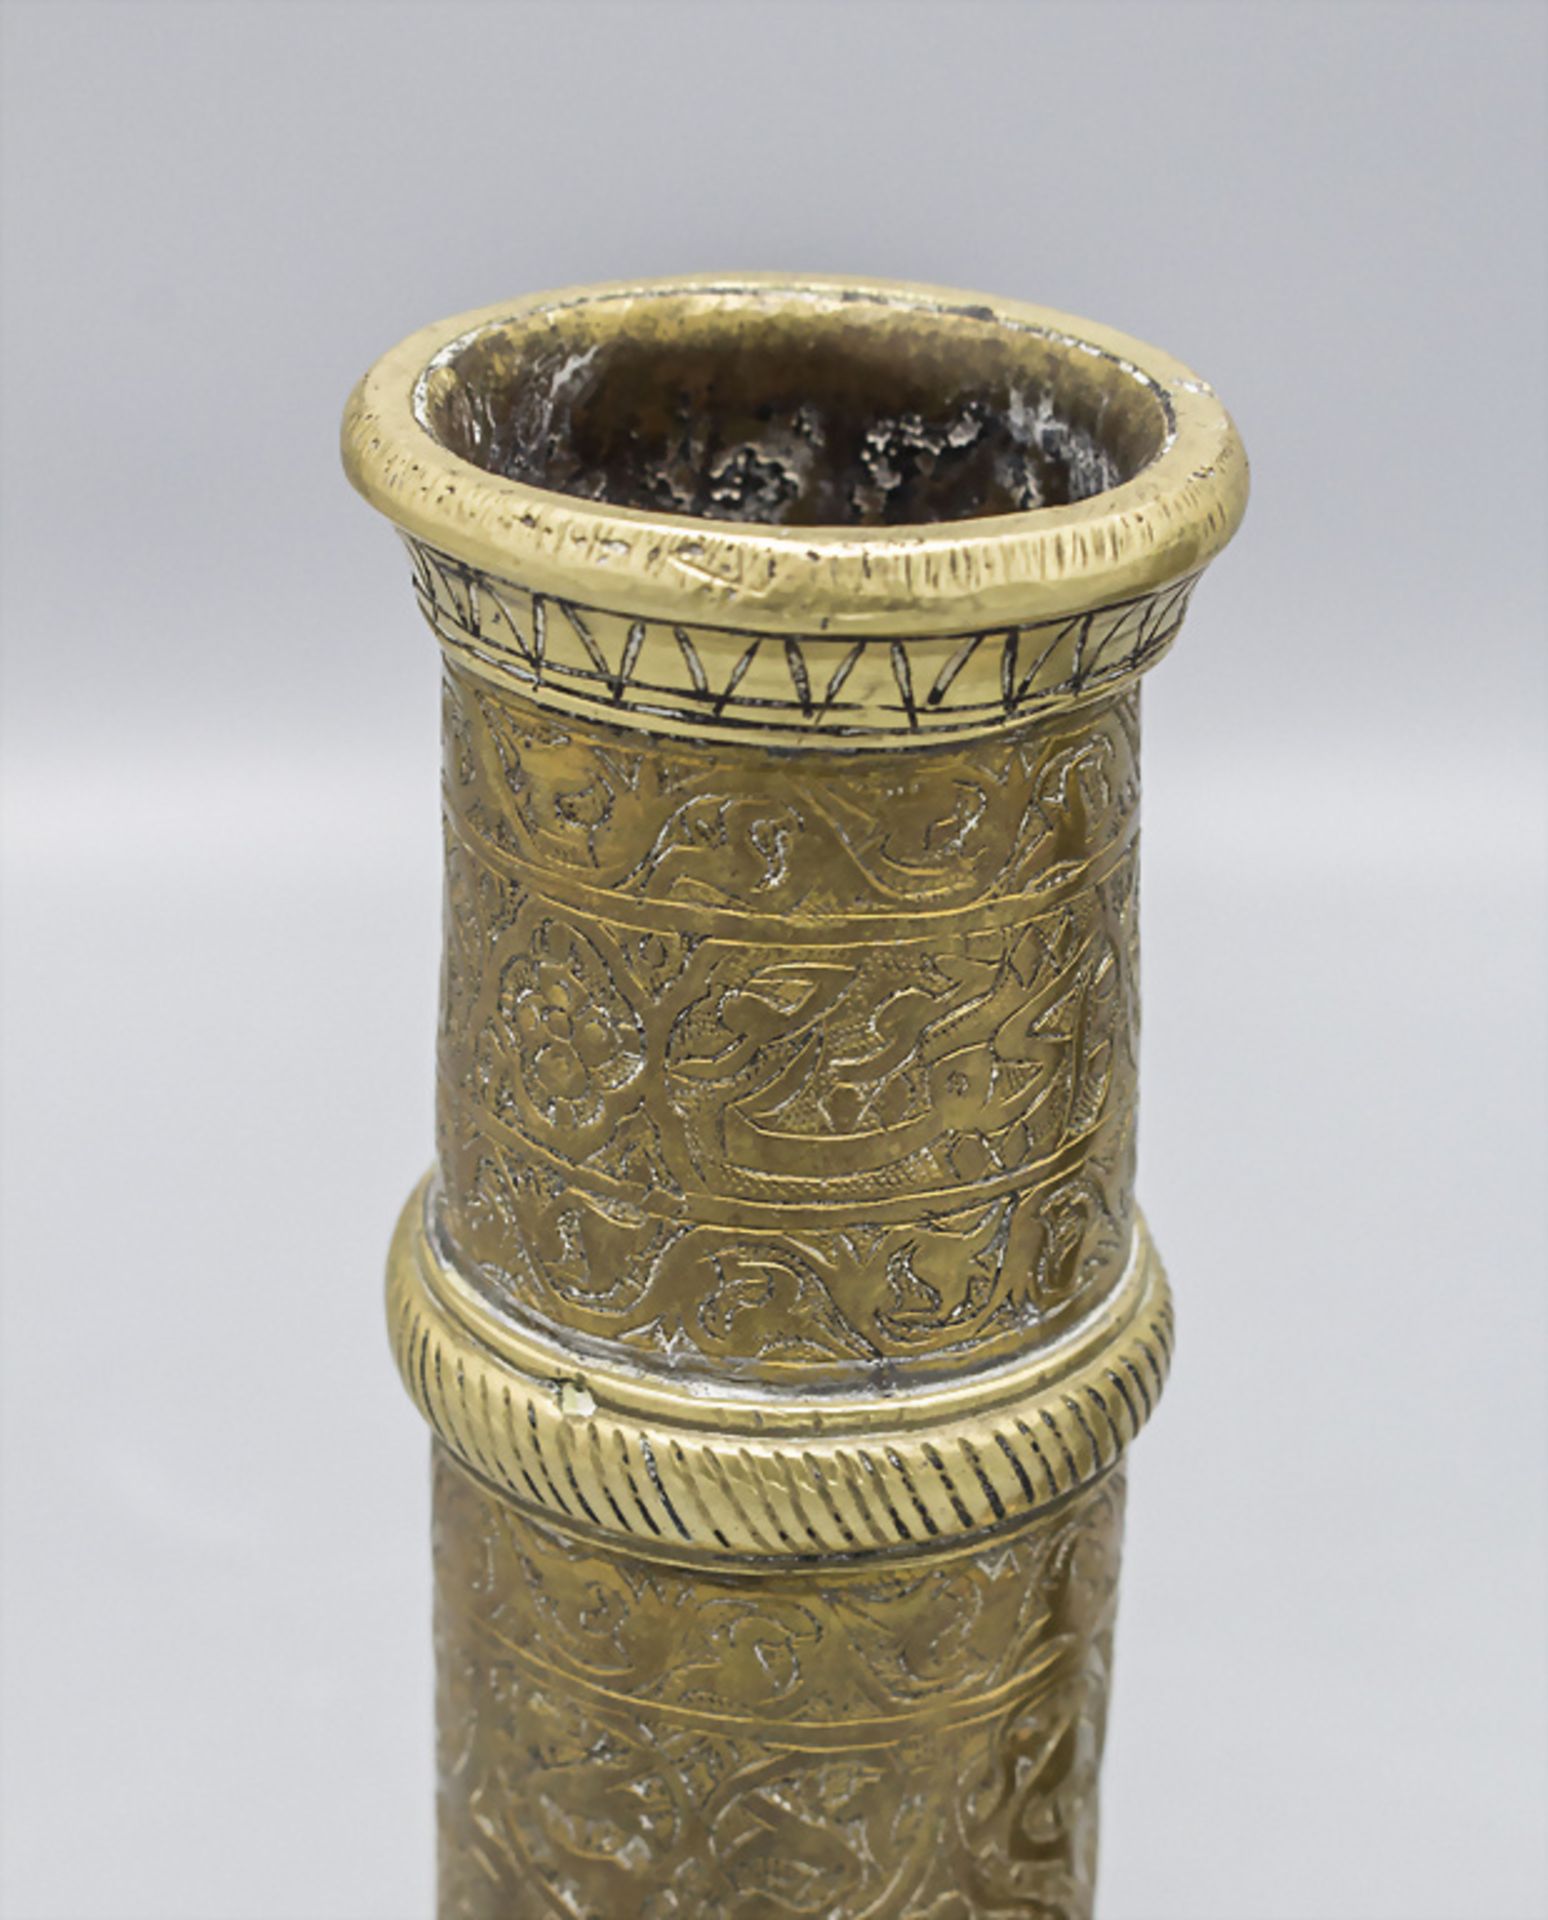 Leuchter Paar / A pair of brass candle holders, Orient, 18. Jh. - Image 2 of 4